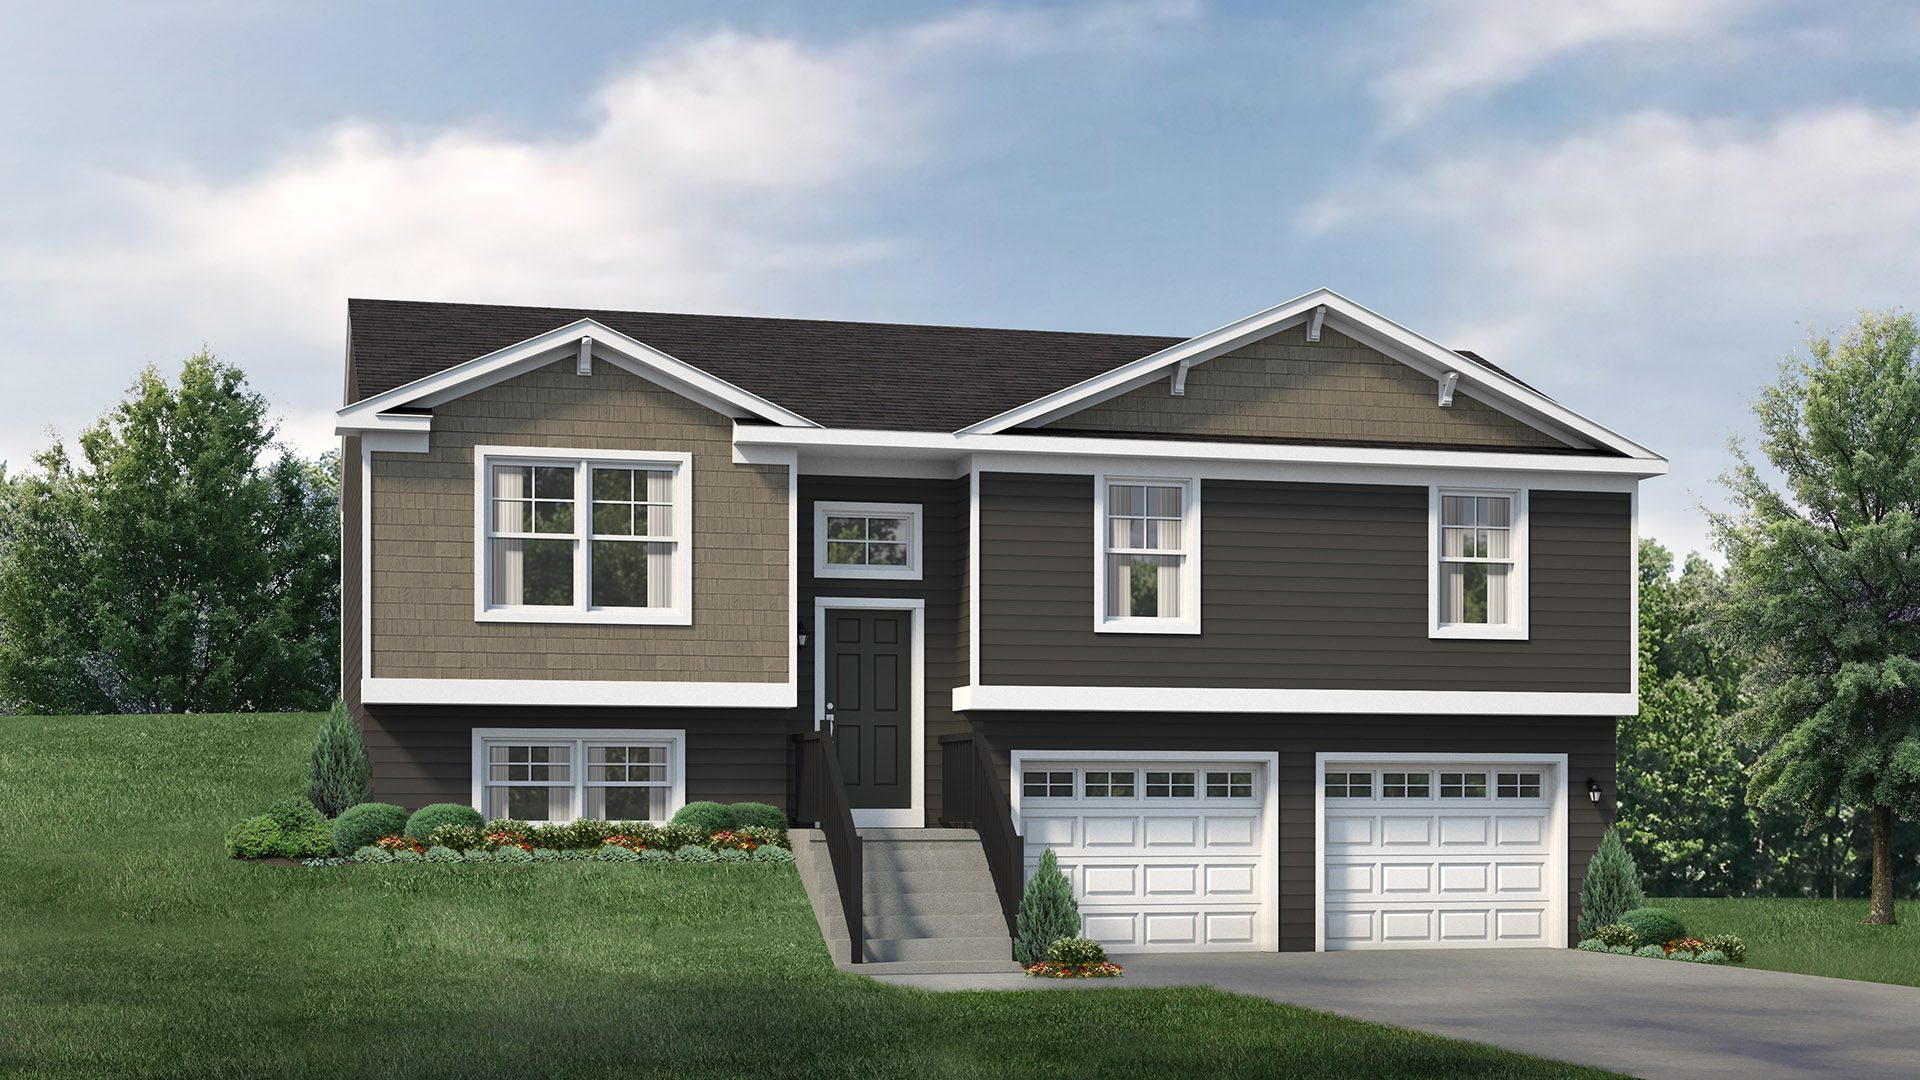 Three New Streamline Series Floor Plans Now Selling at Steeplechase